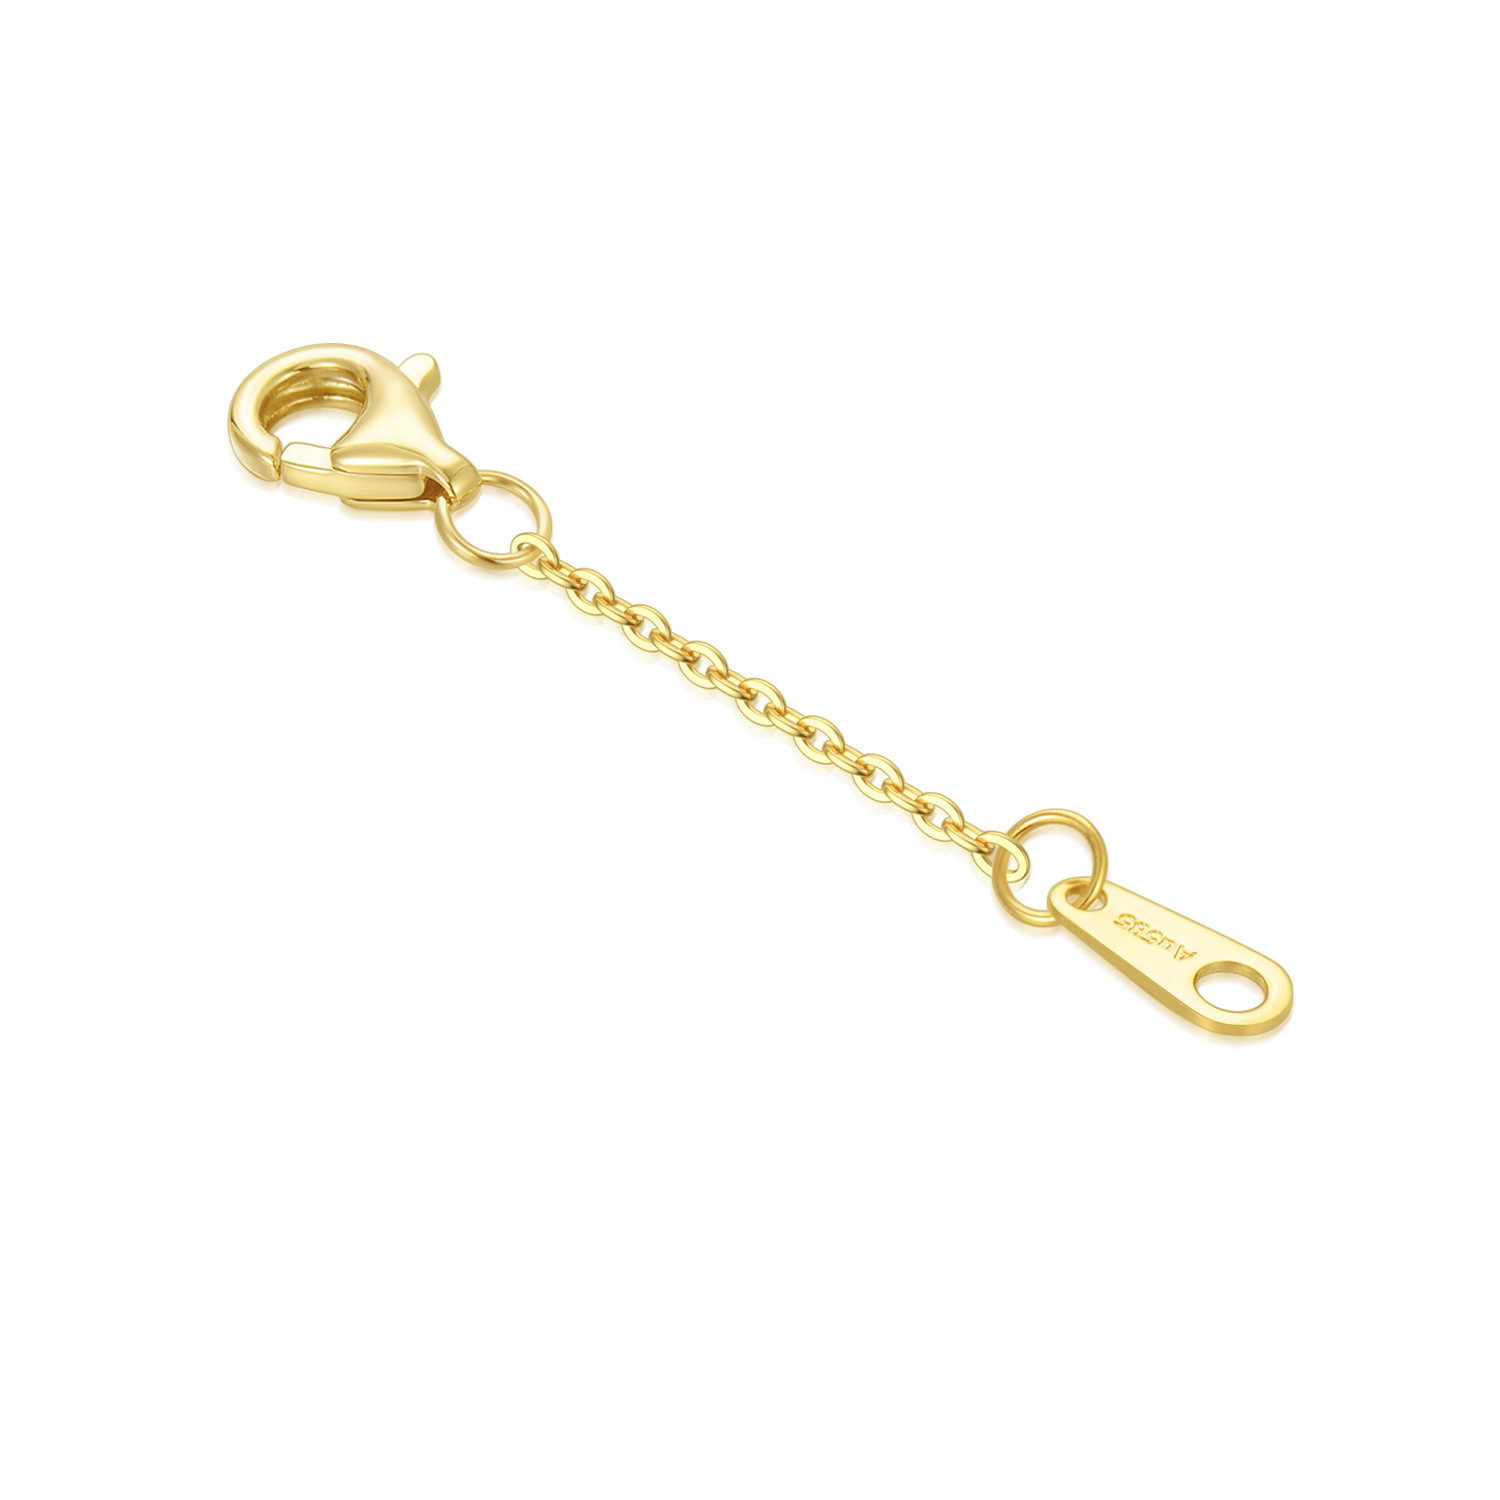 Solid Gold Adjustable Extension Chain for Necklace Bracelet Anklet Durable Strong Removable Chain Extender 14K Yellow Gold 1 2 3 Necklace Bracelet Extender Chain